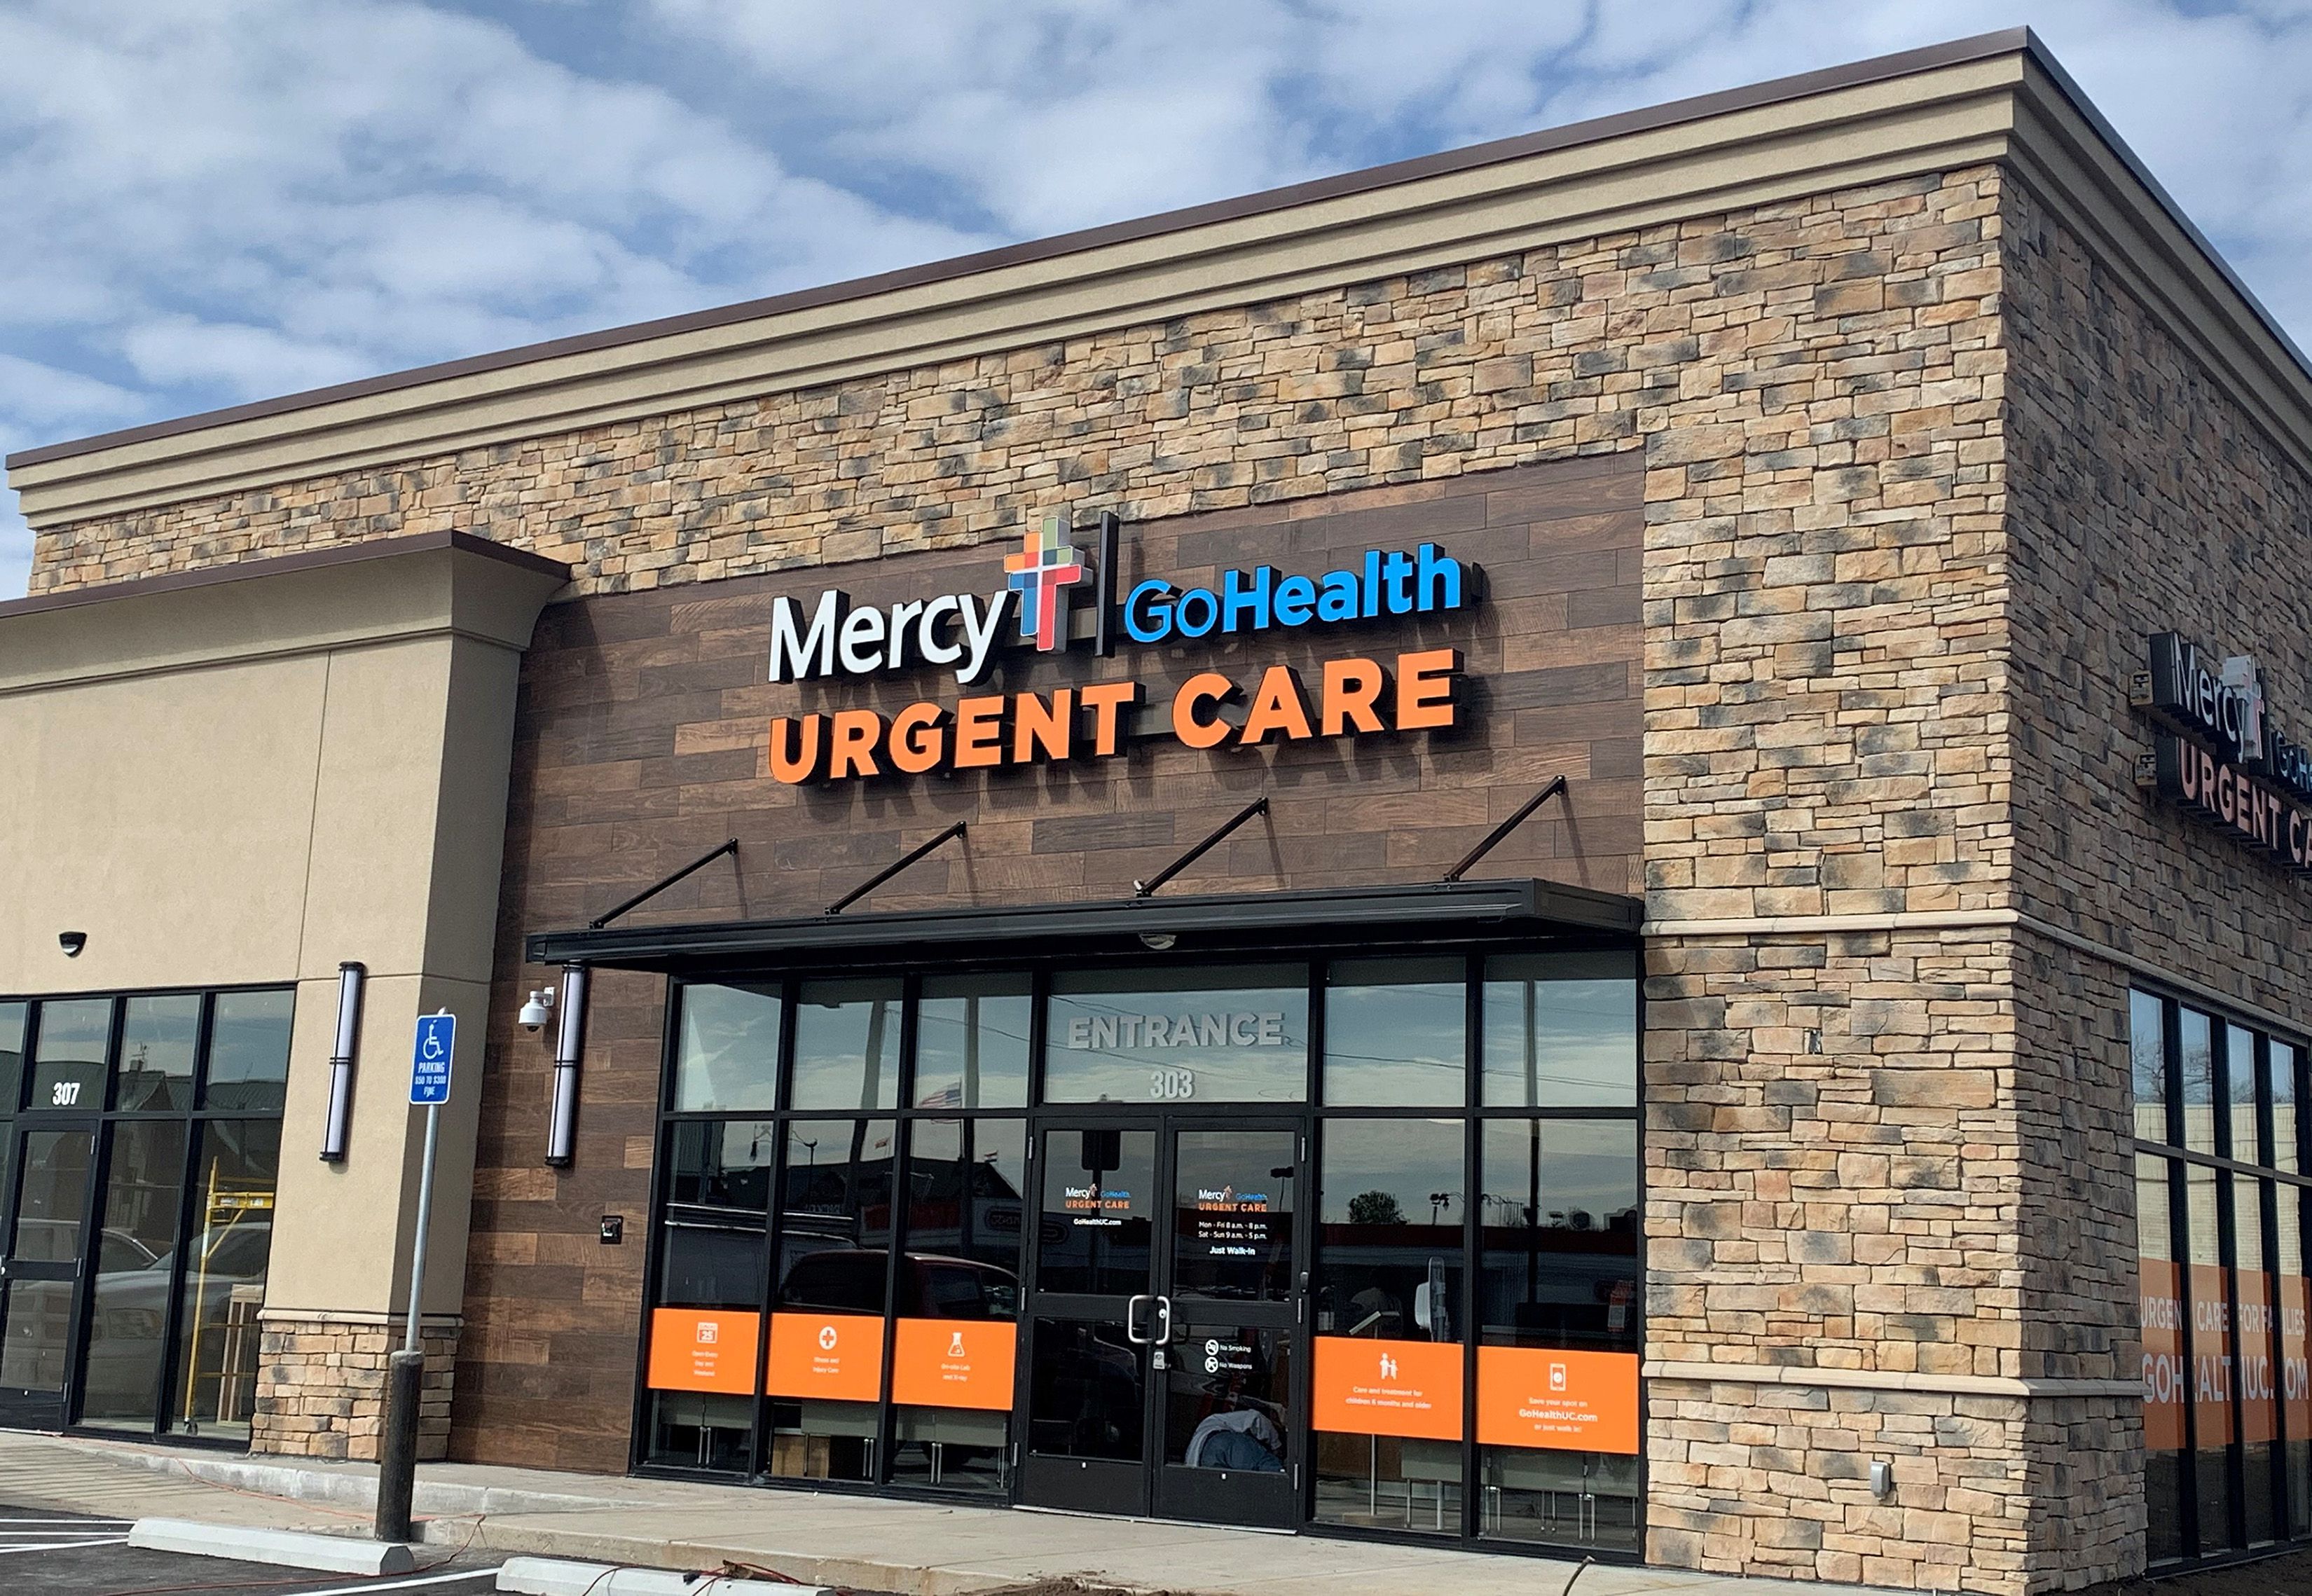 Springfields Fourth Mercy-gohealth Urgent Care Facility Now Open